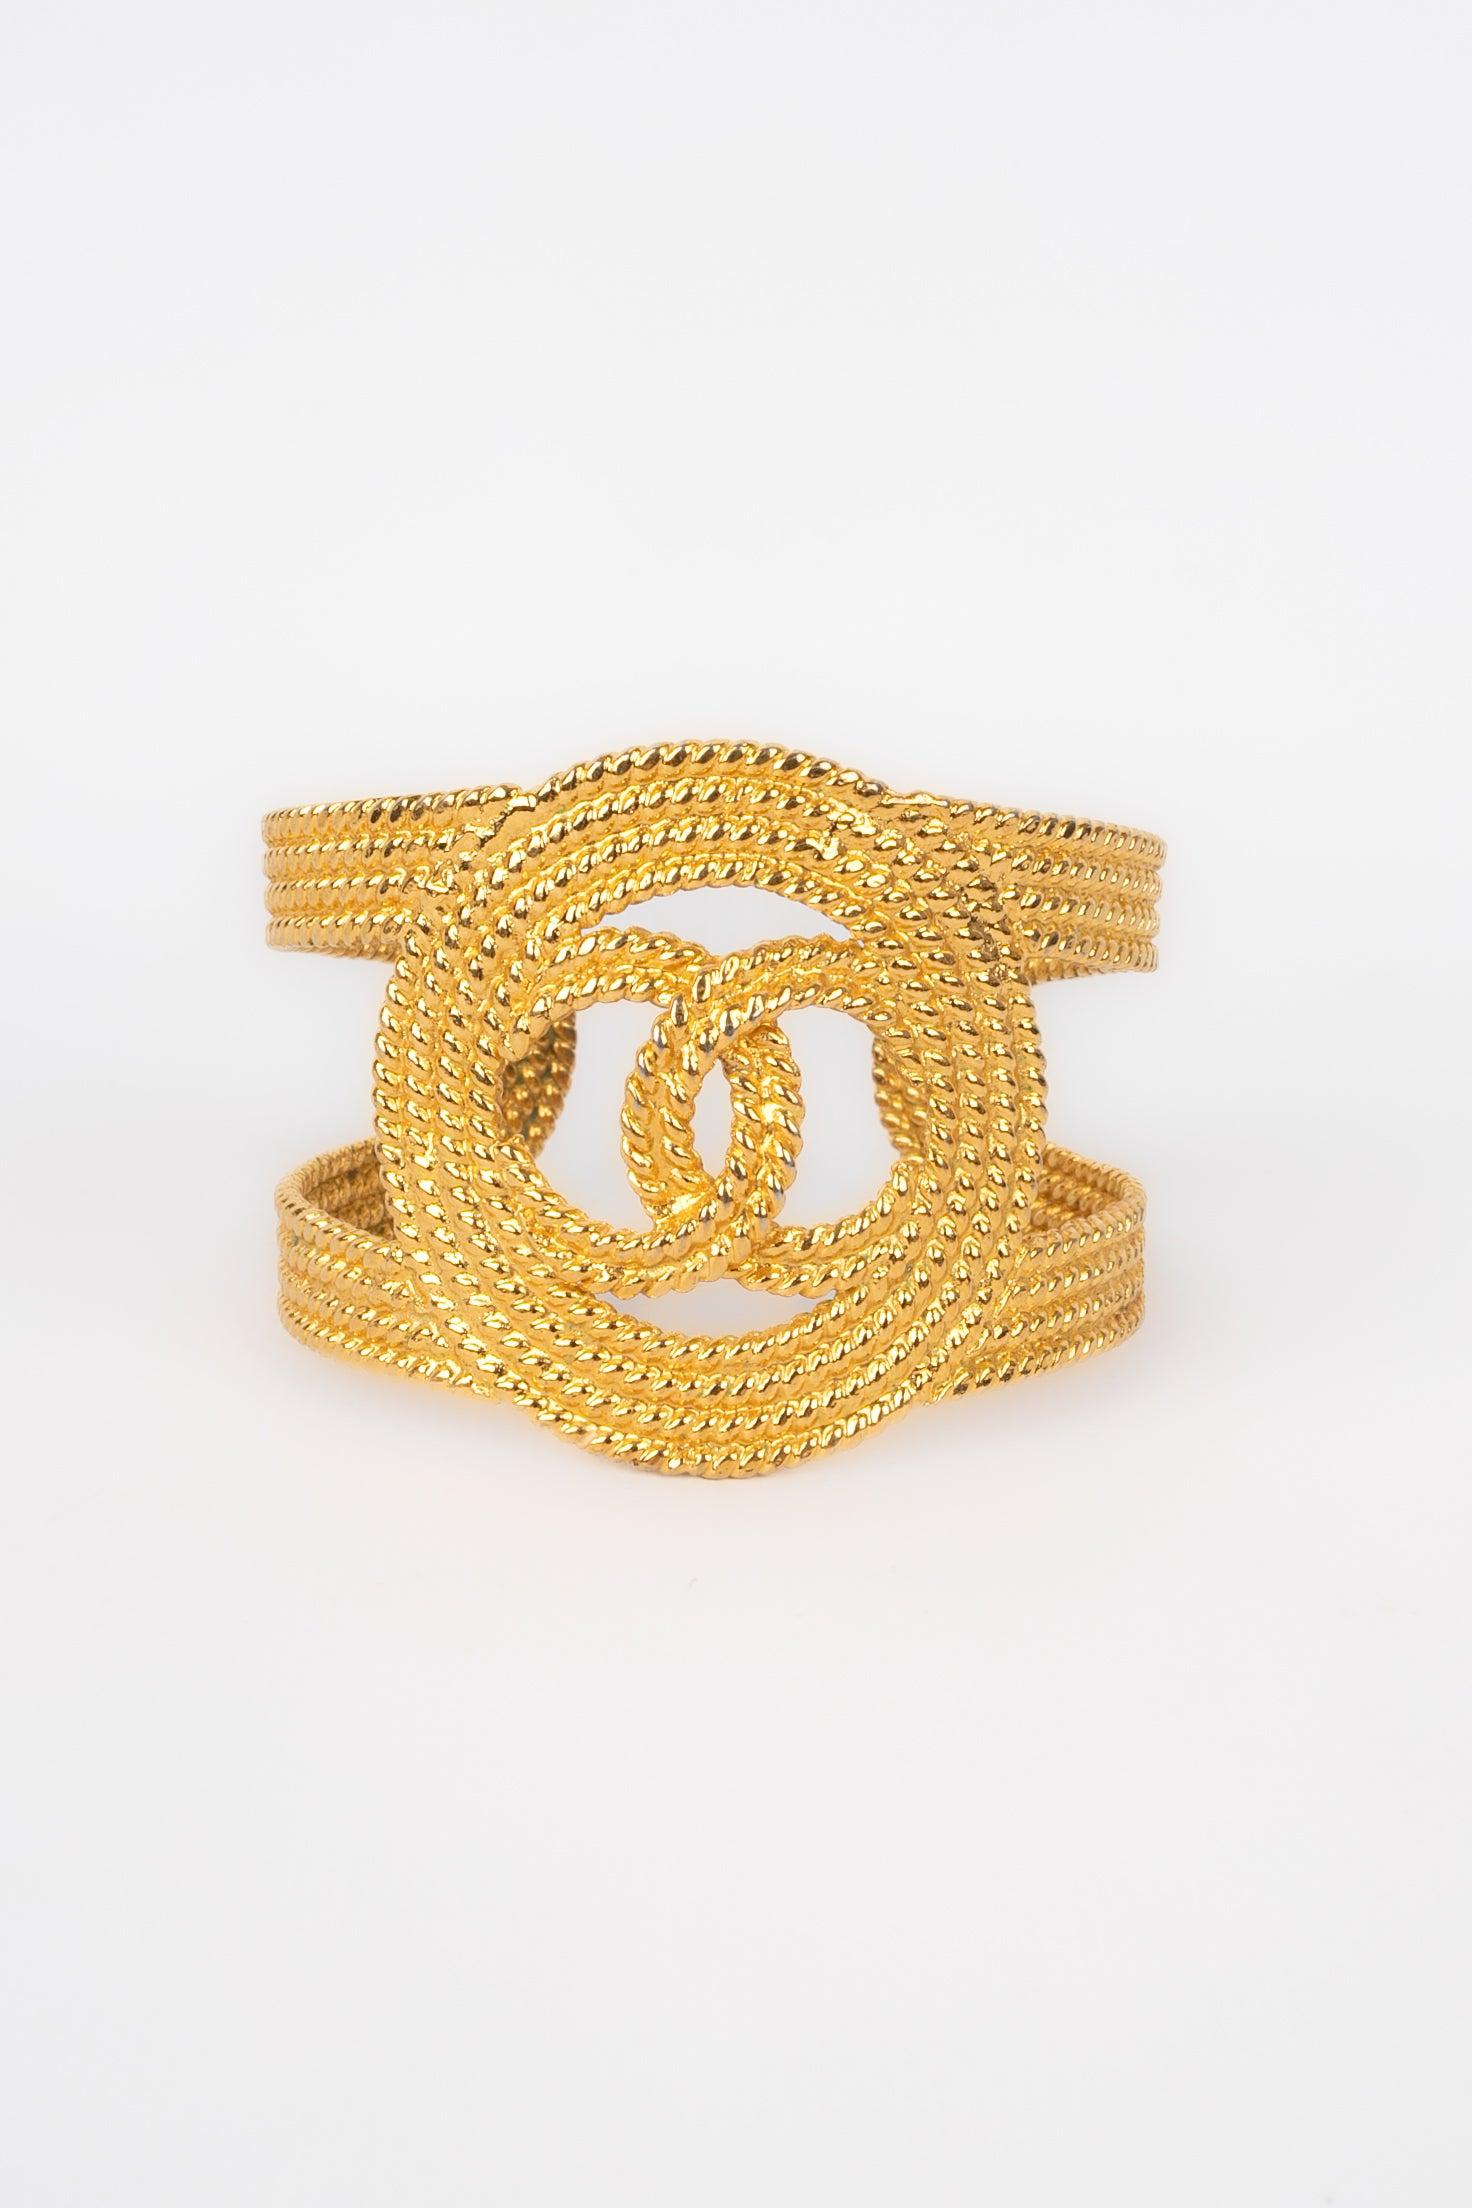 Chanel - (Made in France) Openwork golden emtal cuff bracelet. 2cc8 Collection.
 
 Additional information: 
 Condition: Very good condition
 Dimensions: Length: 15.5 cm - Height: 5 cm
 Period: 21st Century
 
 Seller Reference: BRAB43